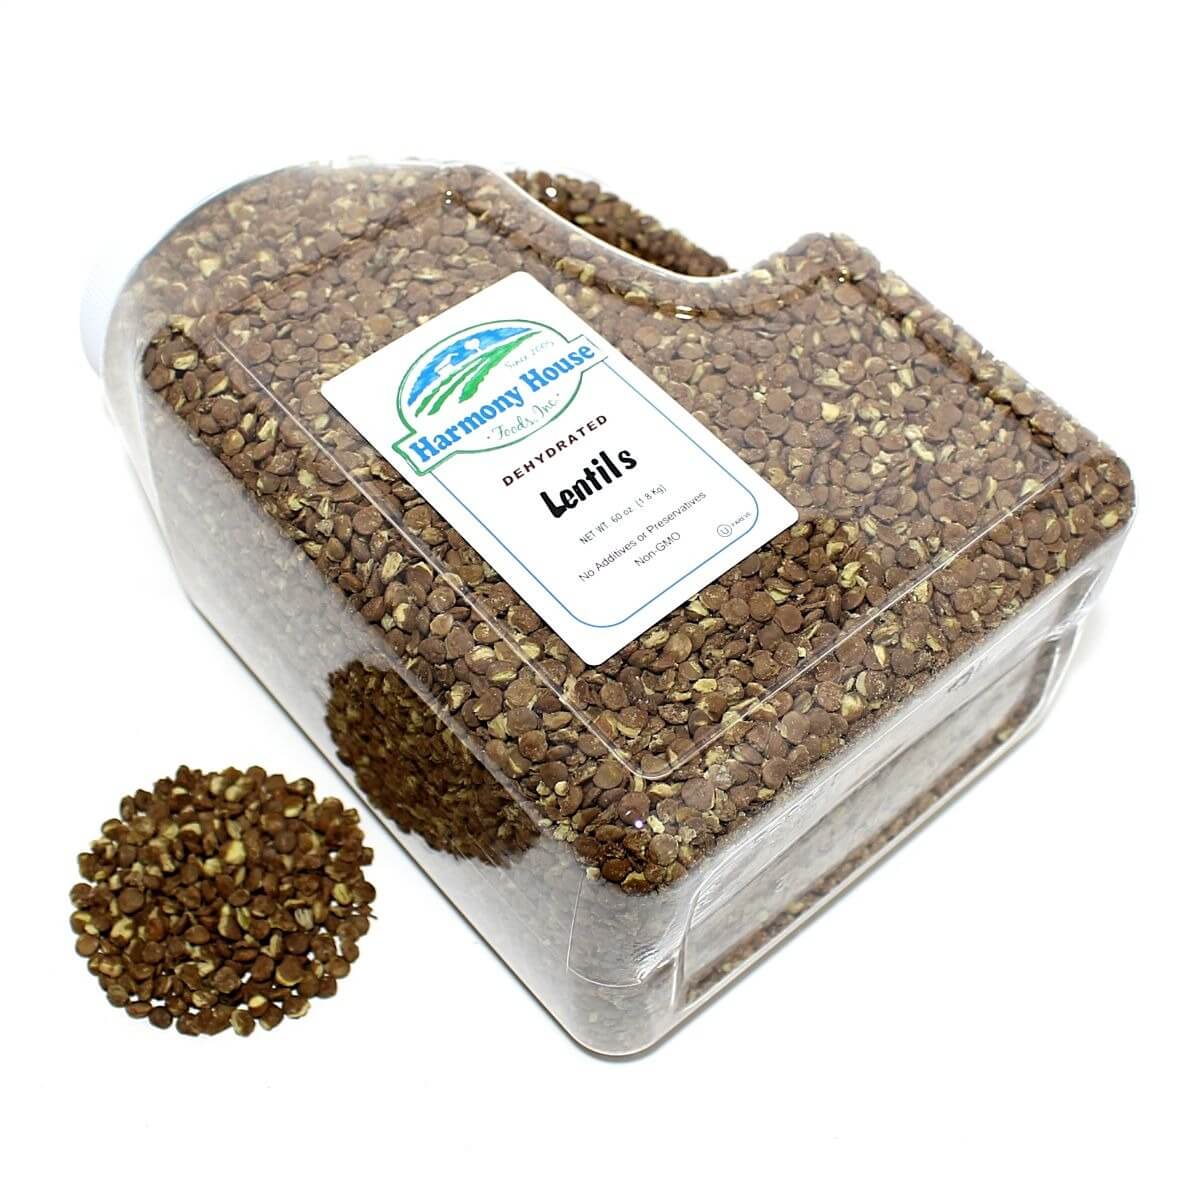 Harmony House Lentils in a plastic container.